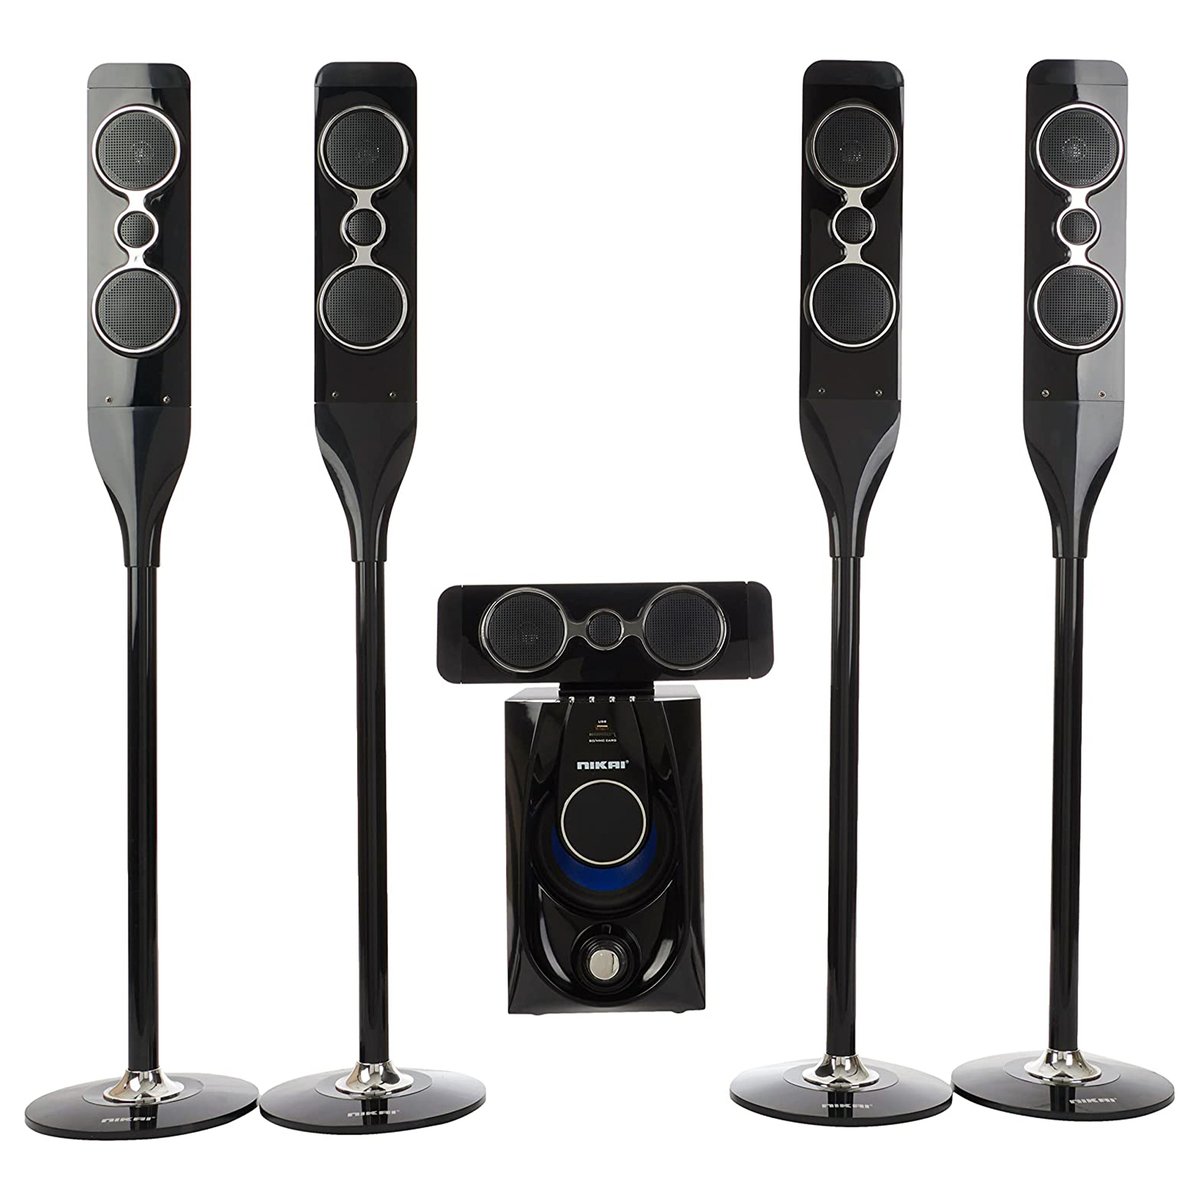 Nikai 5.1 Channel Home Theater NHT6500B